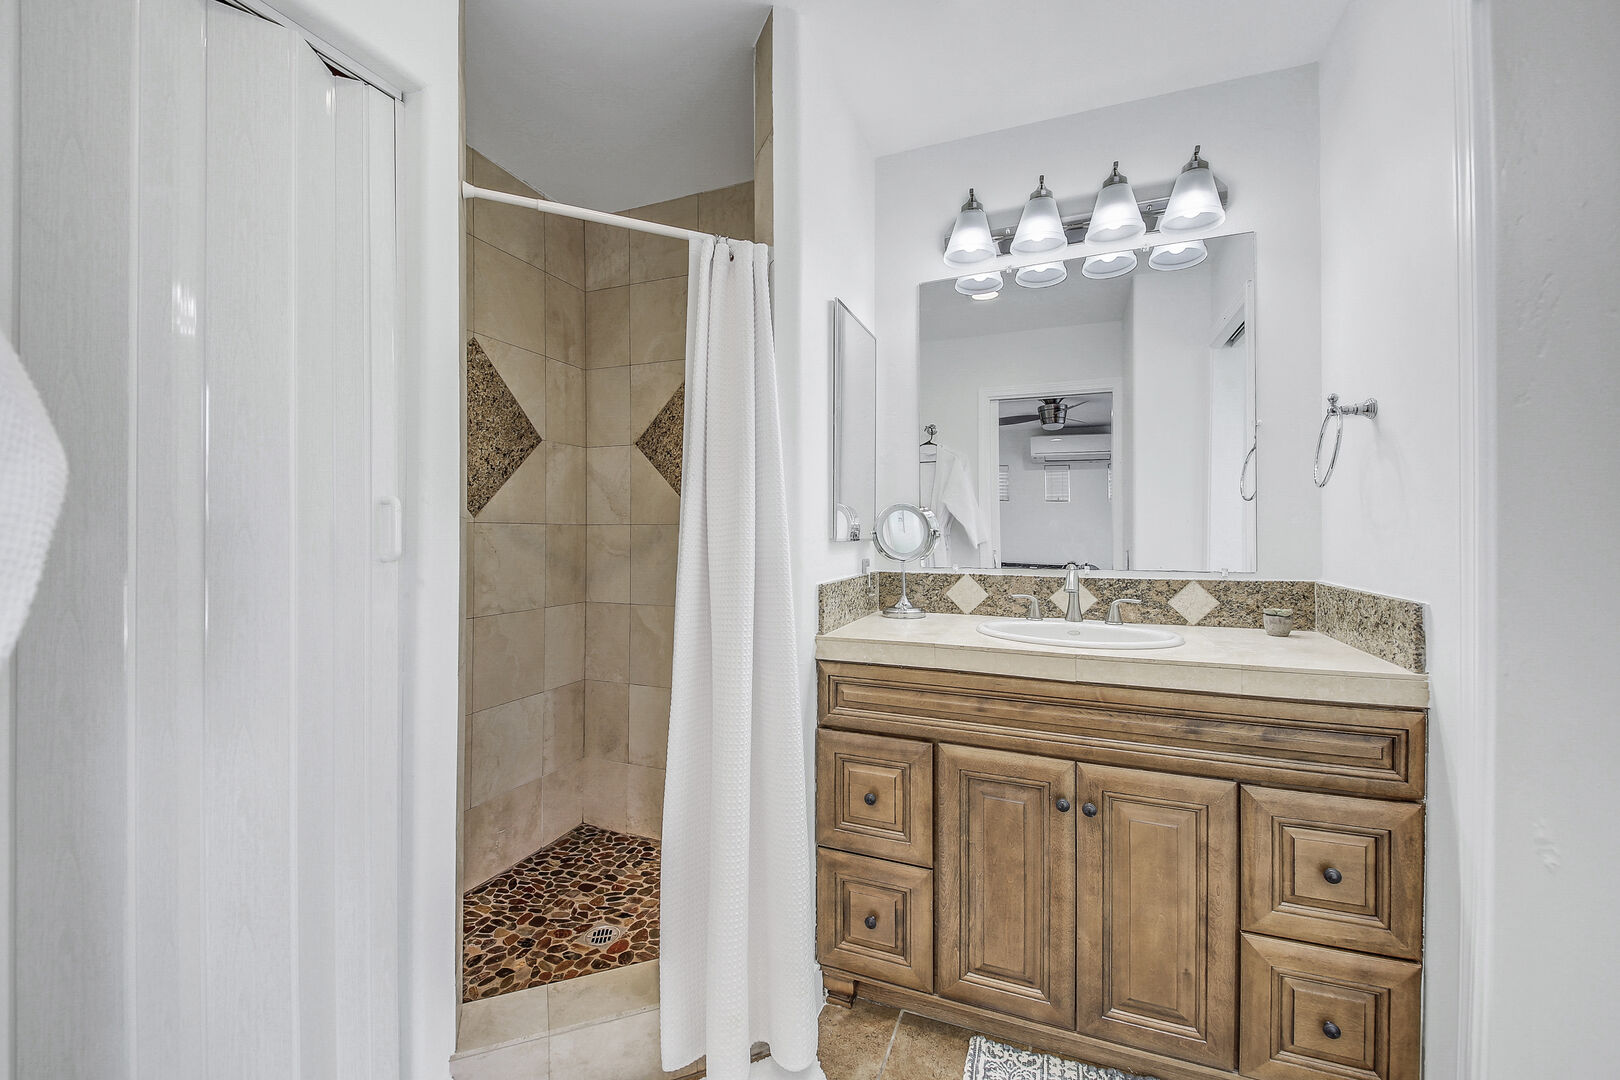 The private, en suite bathroom features a tile shower, and a vanity sink.